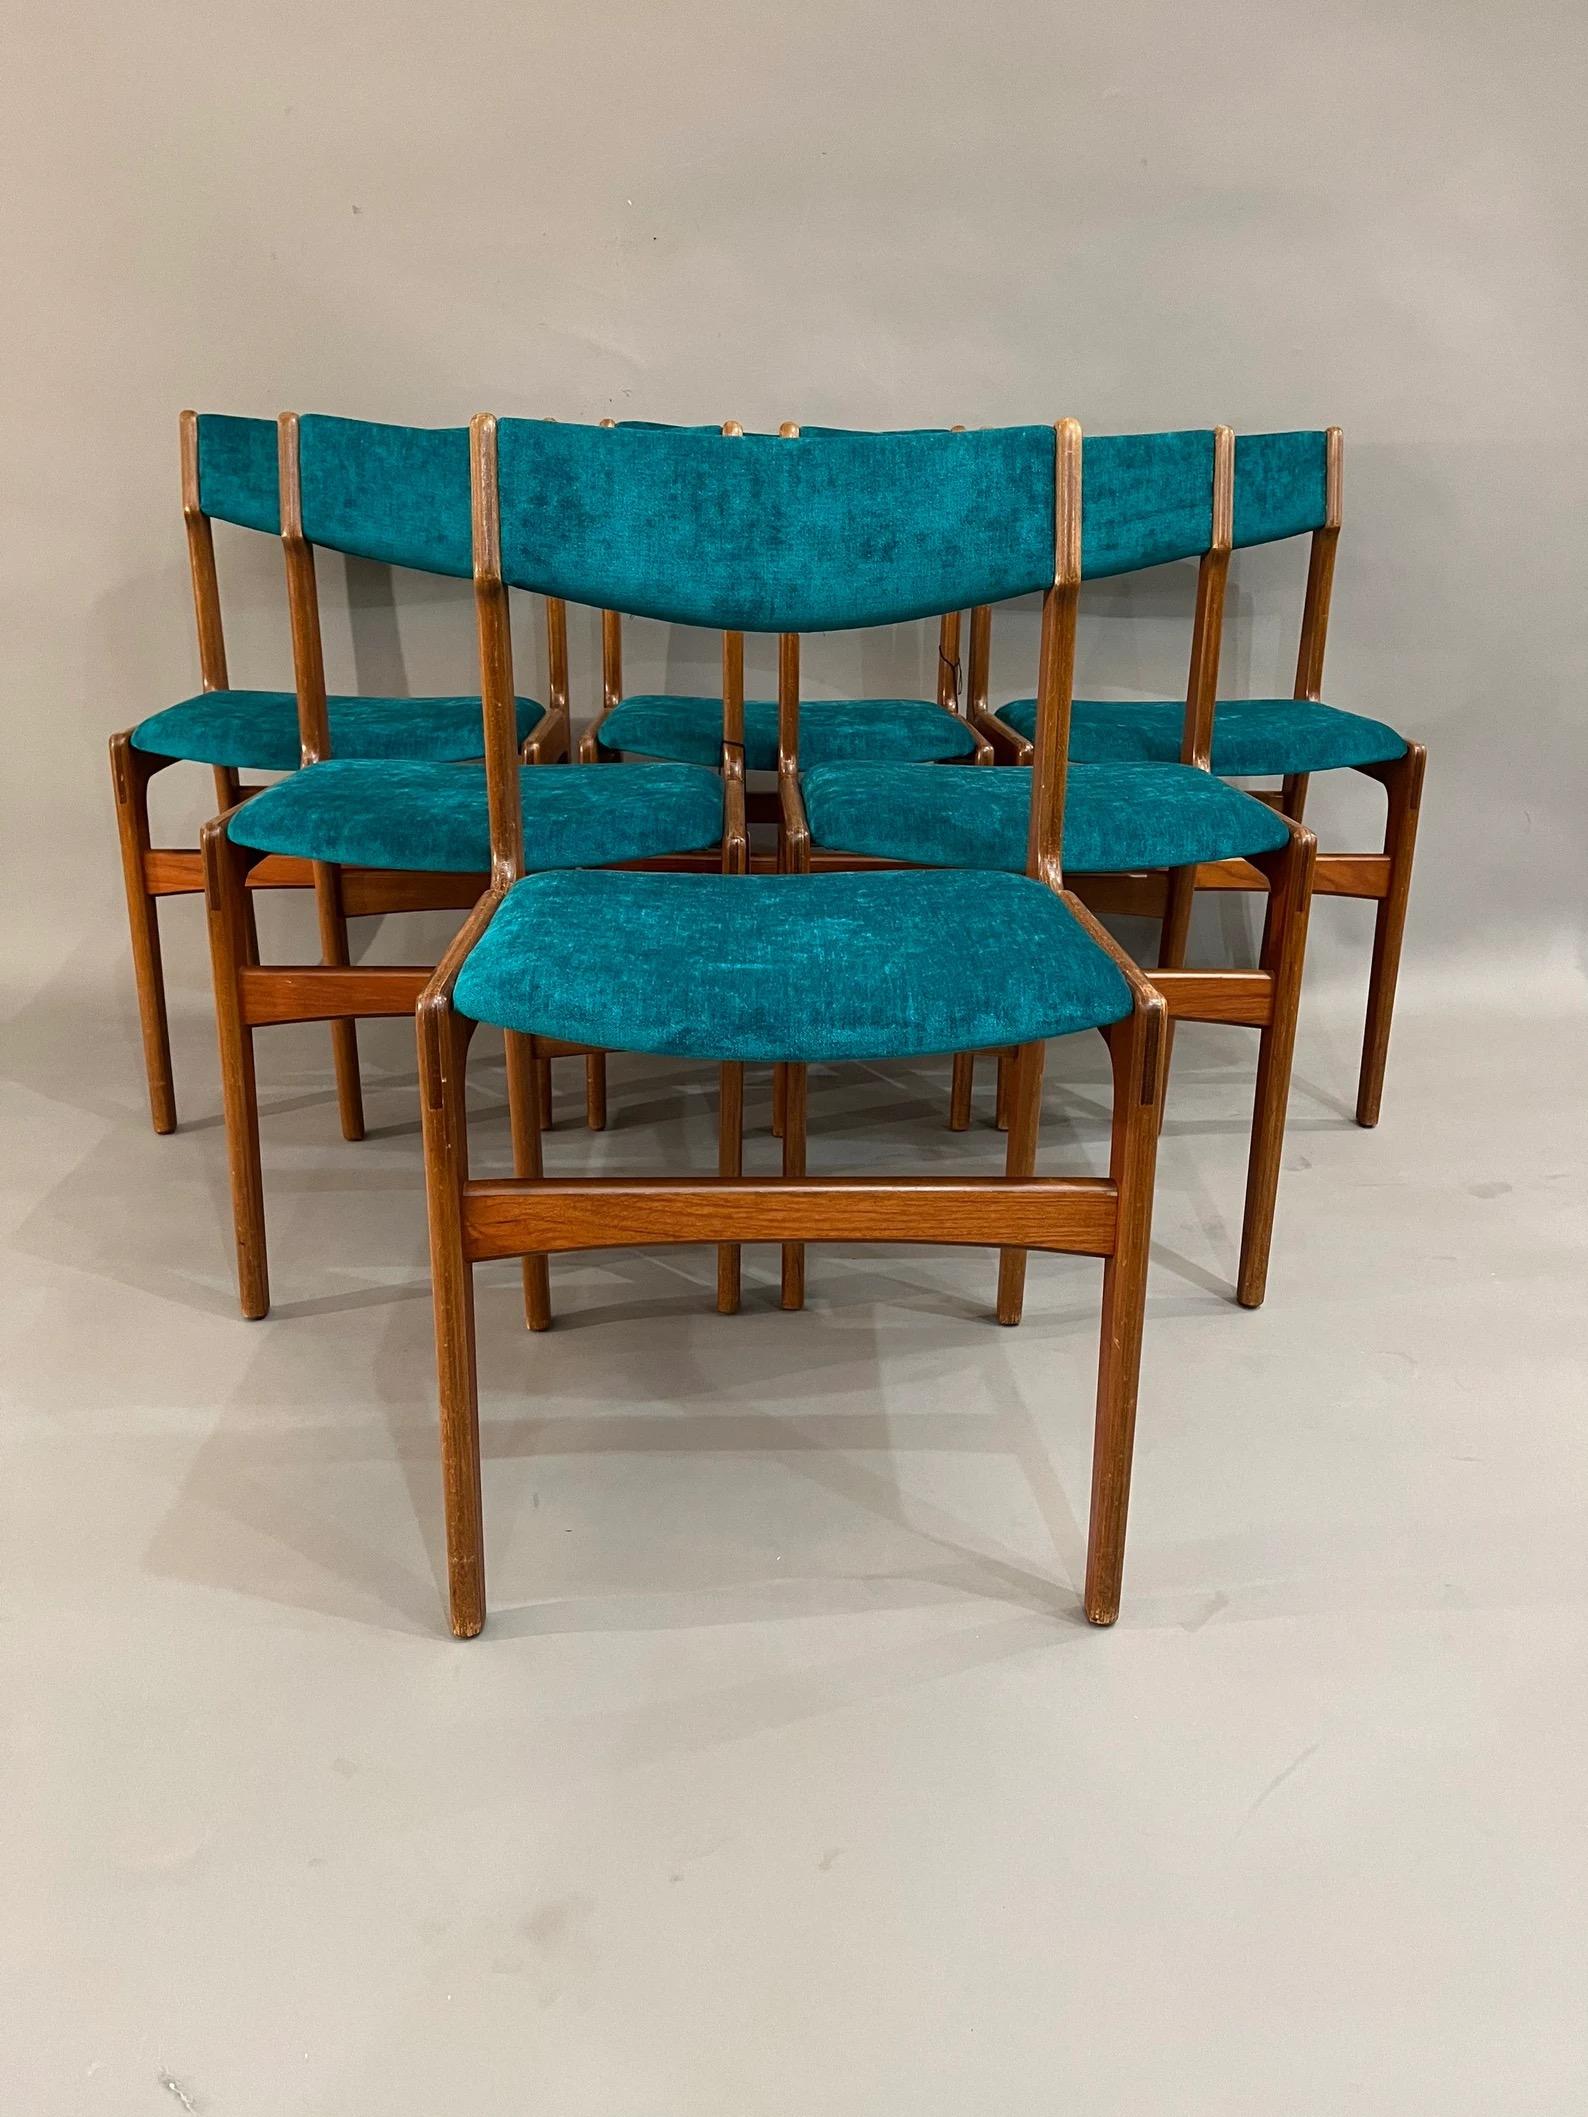 Set of six 1960’s Danish mid century dining chairs designed by Erik Buch for O.D. Møbler. Elegant frames support square seats and scooped backs upholstered in a brown basketweave fabric.
Curated Mid Century teak dining chairs with the new teal